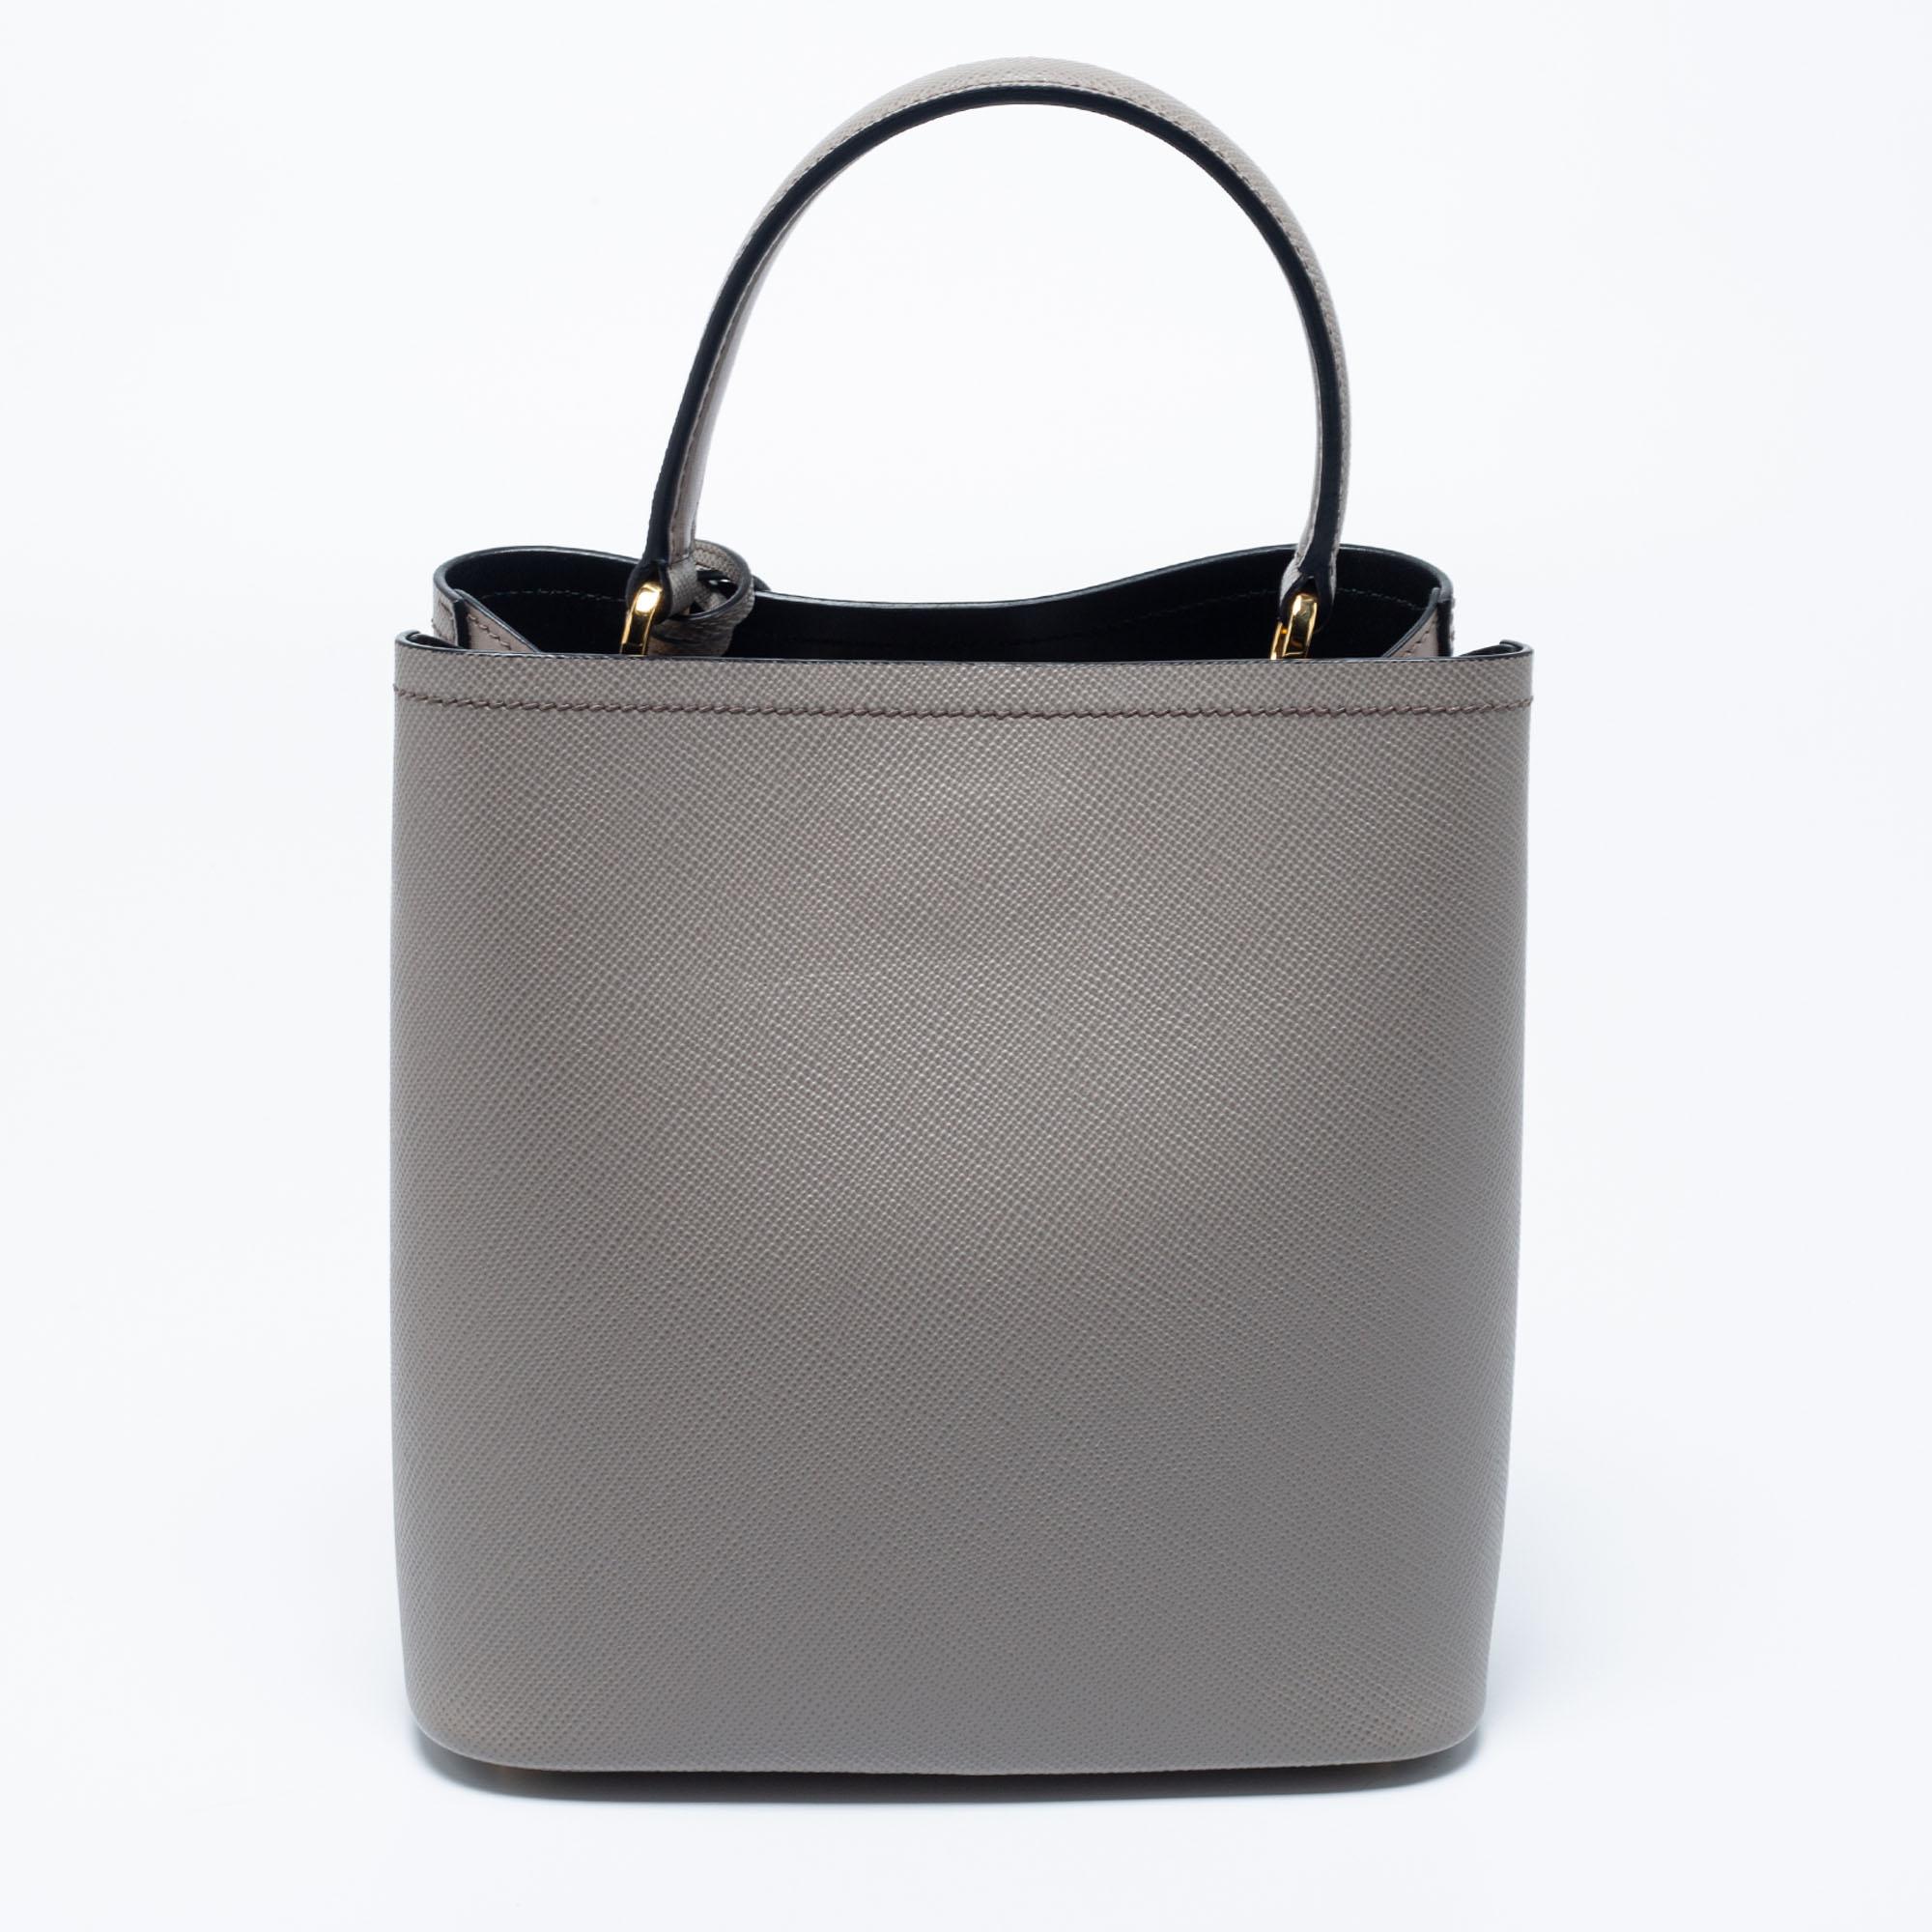 Distinctive in design, the Panier bag from Prada definitely deserves to be yours! This one has been crafted from grey Saffiano Lux leather and features a single top handle, a shoulder strap, and the brand logo on the front. It opens to a spacious